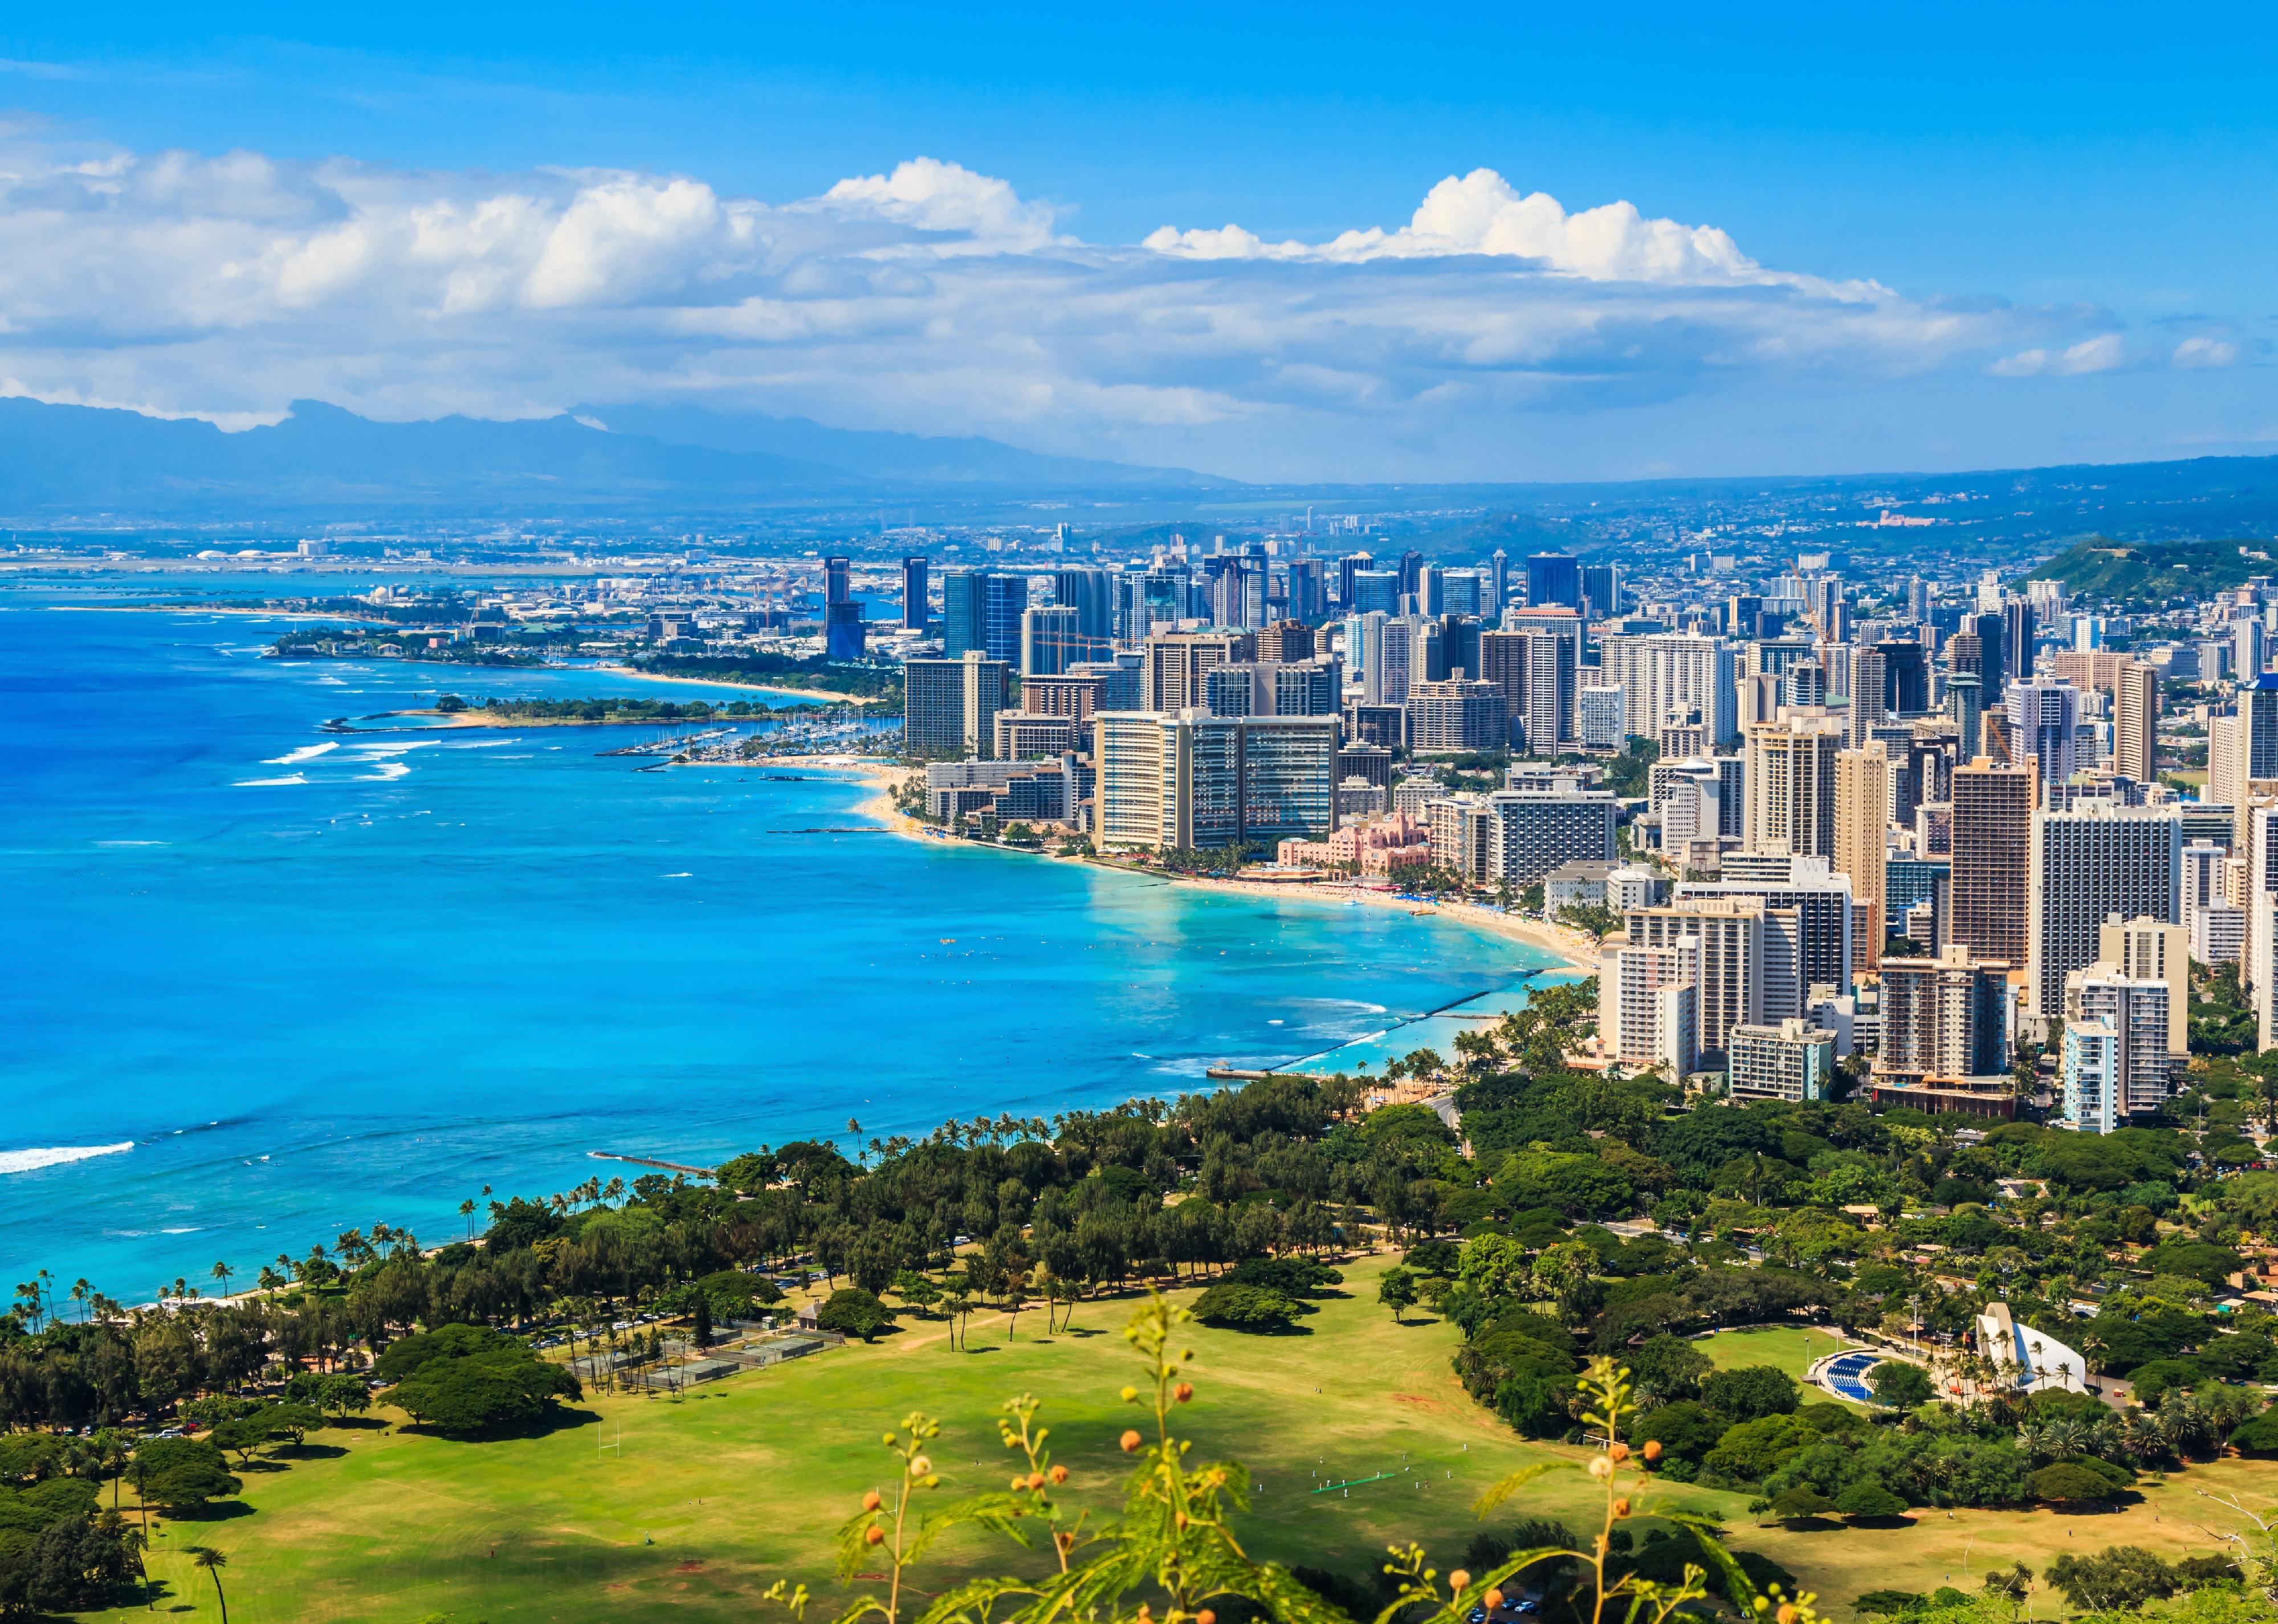 Aerial view of Downtown Honolulu skyline and the surrounding area.